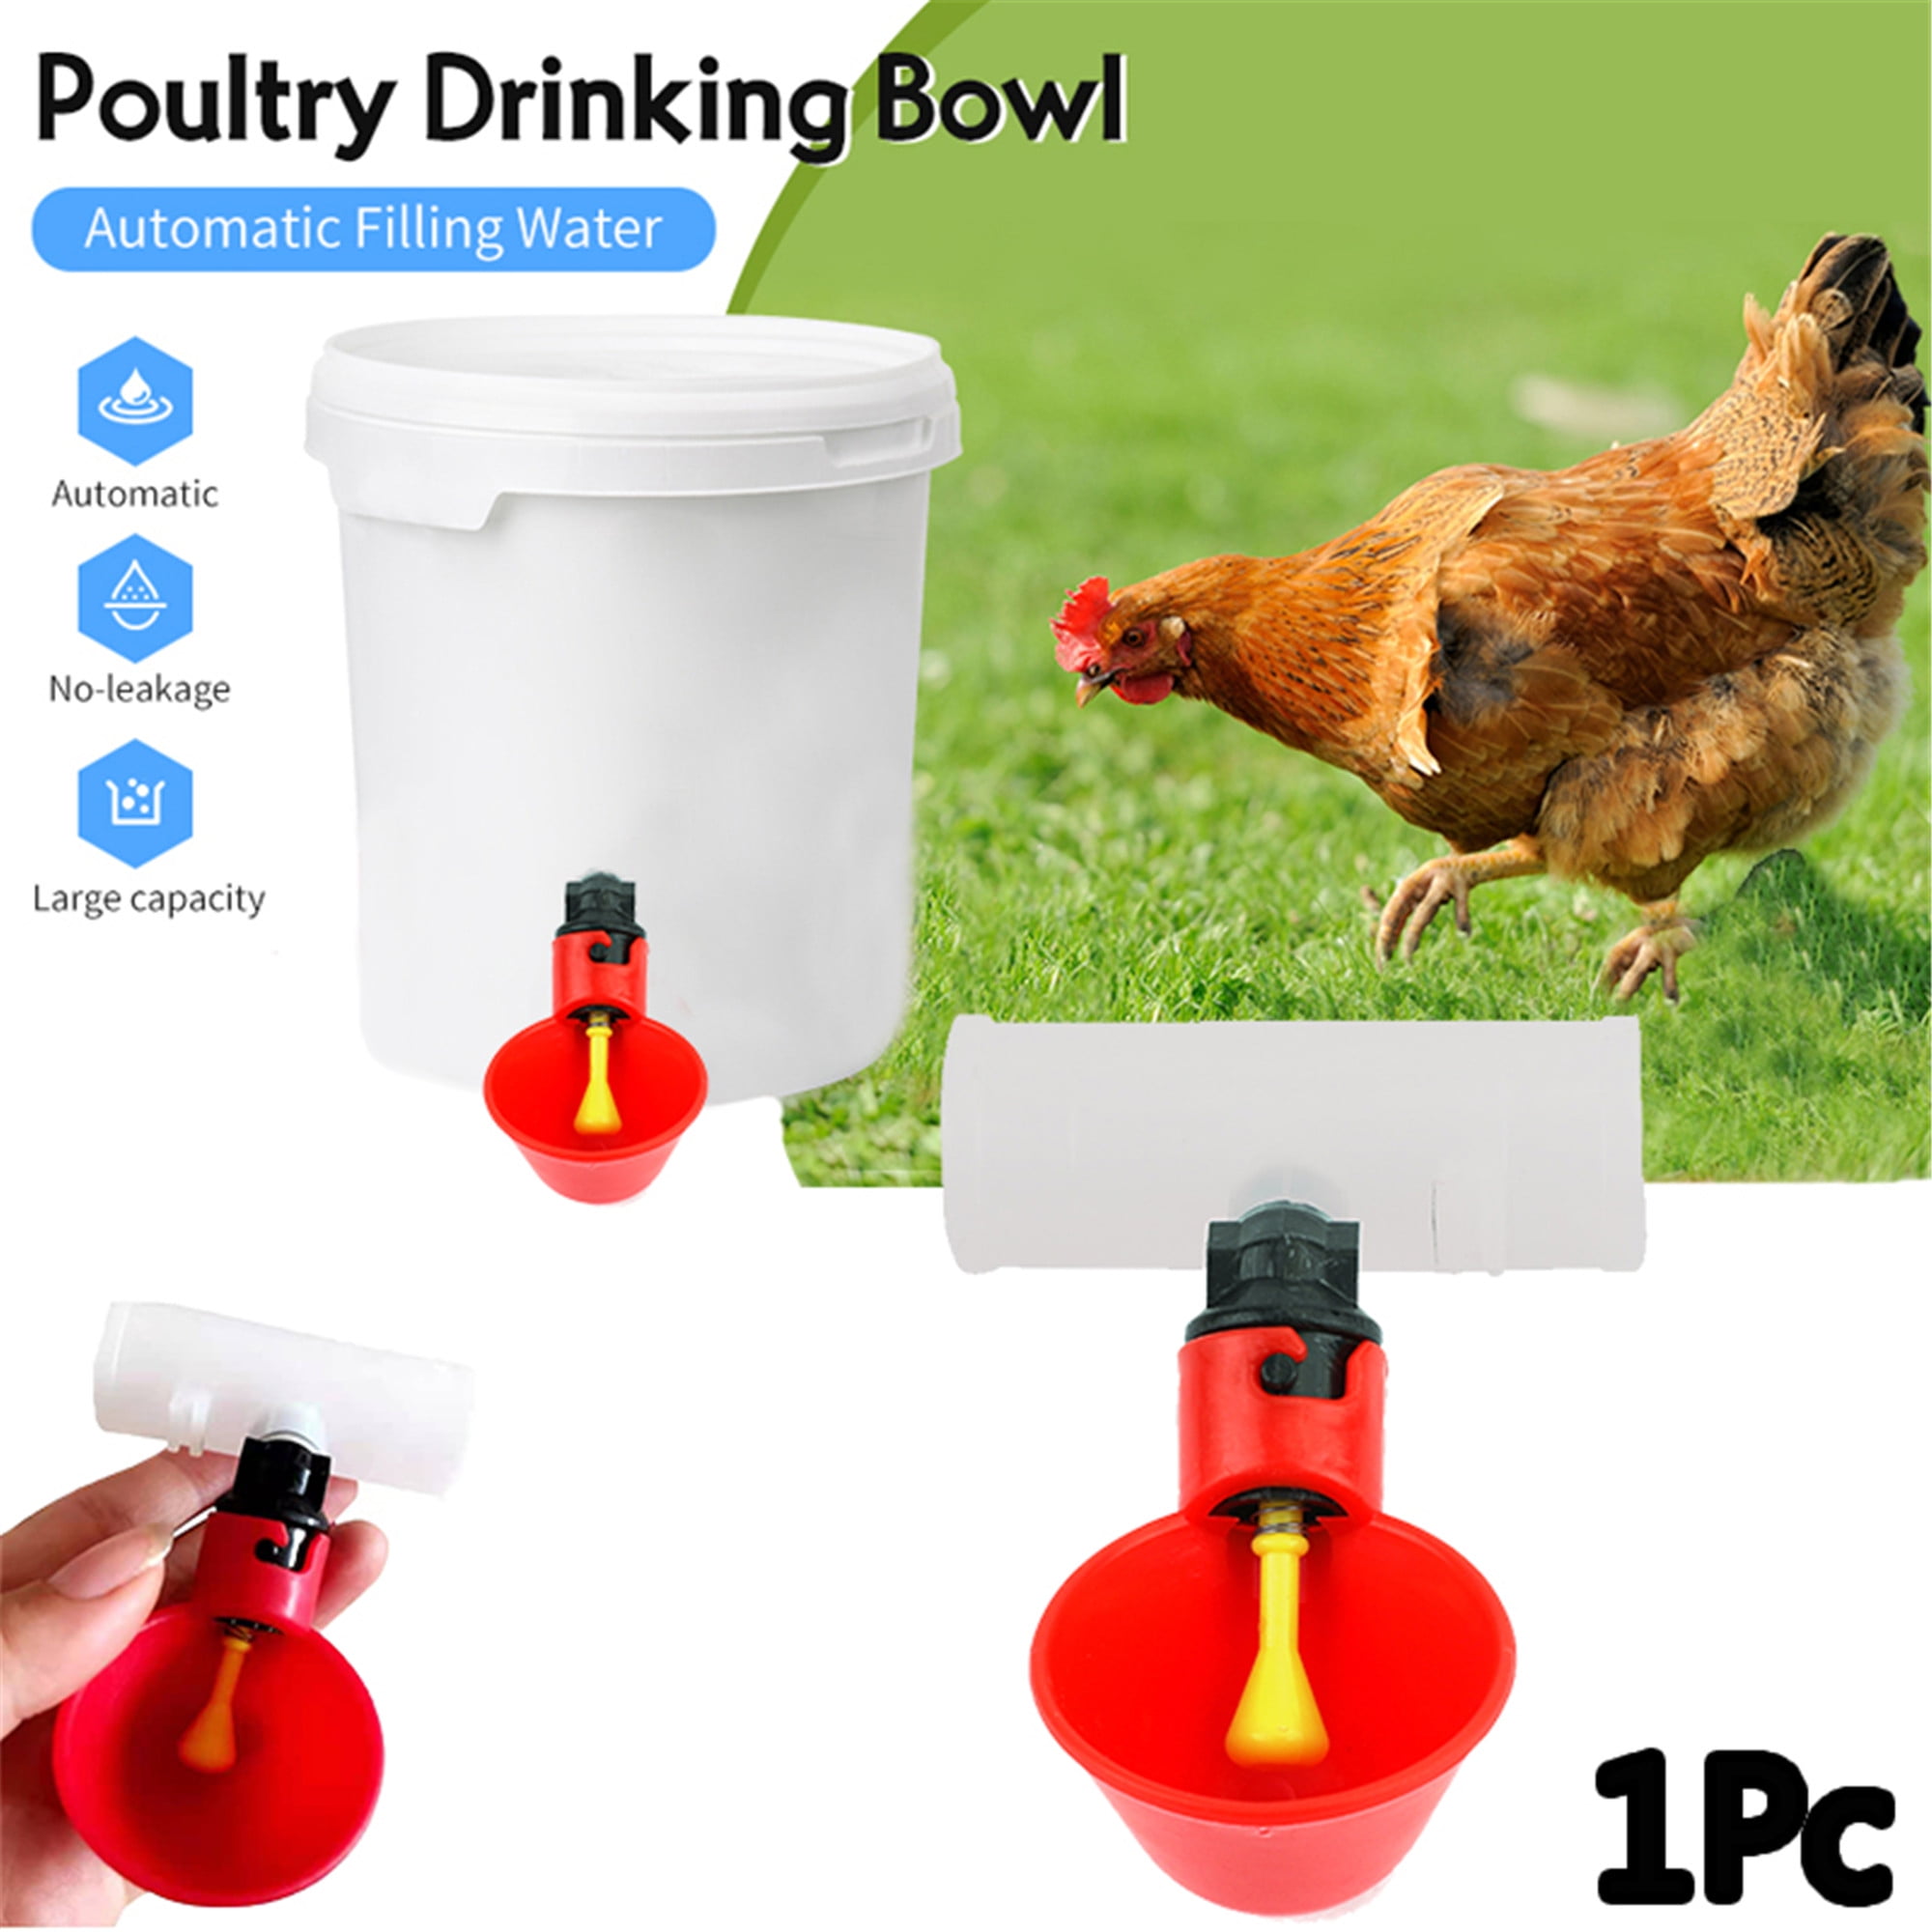 6 POULTRY DRINKER Waterers for Chickens Hens Chicks Turkey Quail Poultry Birds 